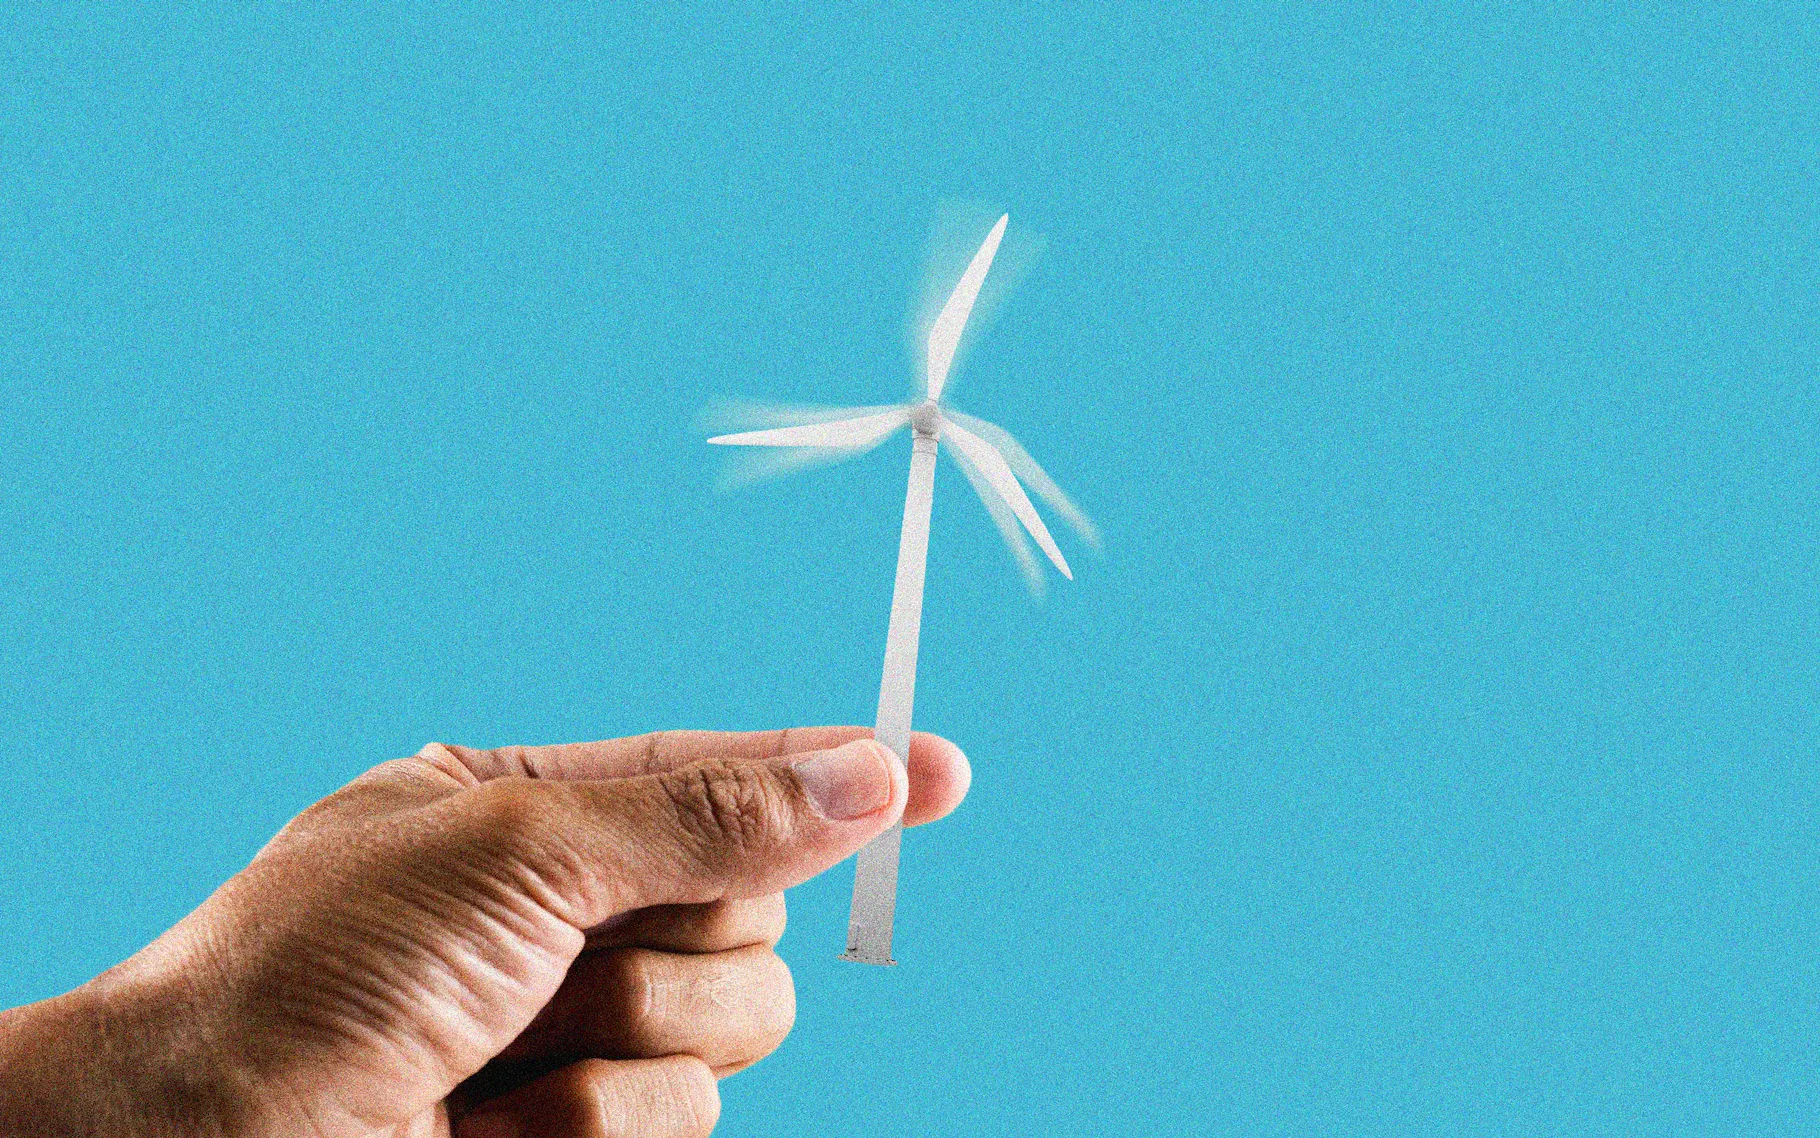 Person holding small wind turbine with a blue background